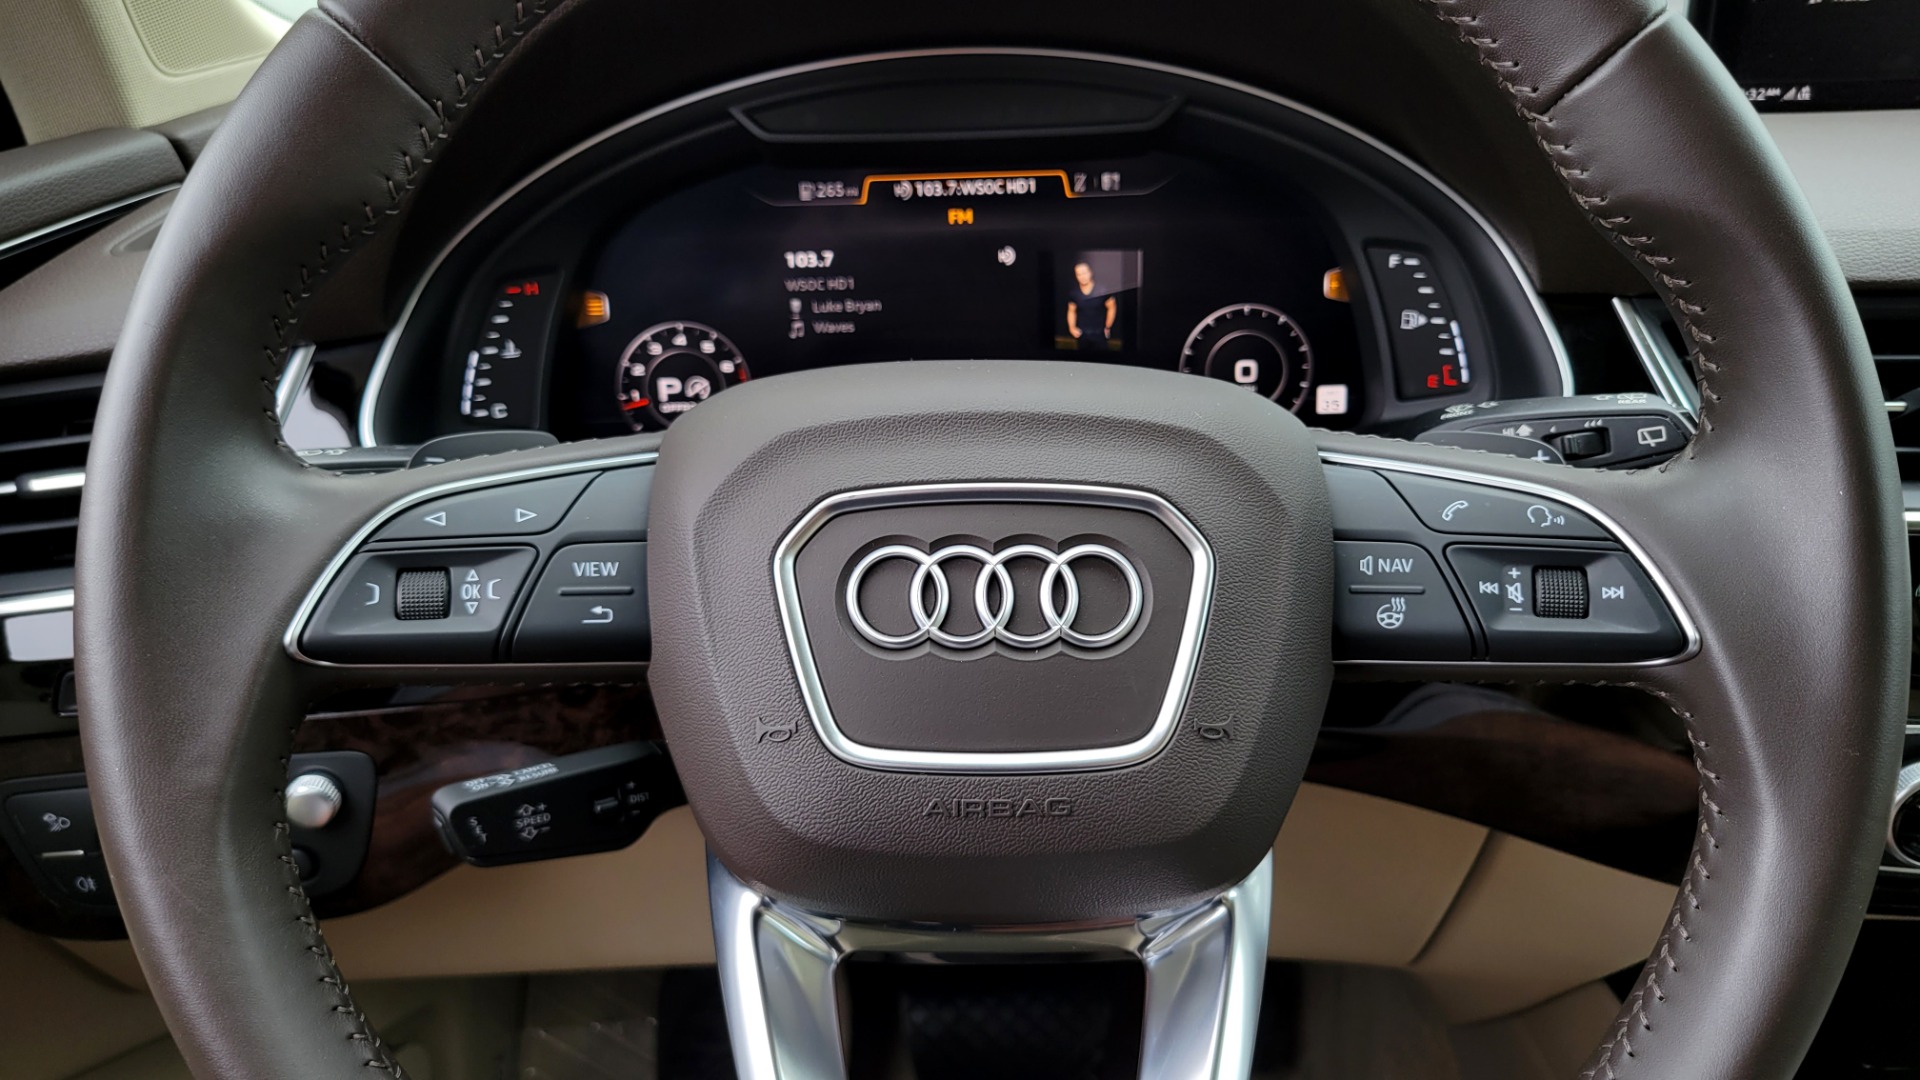 Used 2019 Audi Q7 PRESTIGE / CONV PKG / BOSE / HUD / CLD WTHR / TOWING / REARVIEW for sale $51,995 at Formula Imports in Charlotte NC 28227 50